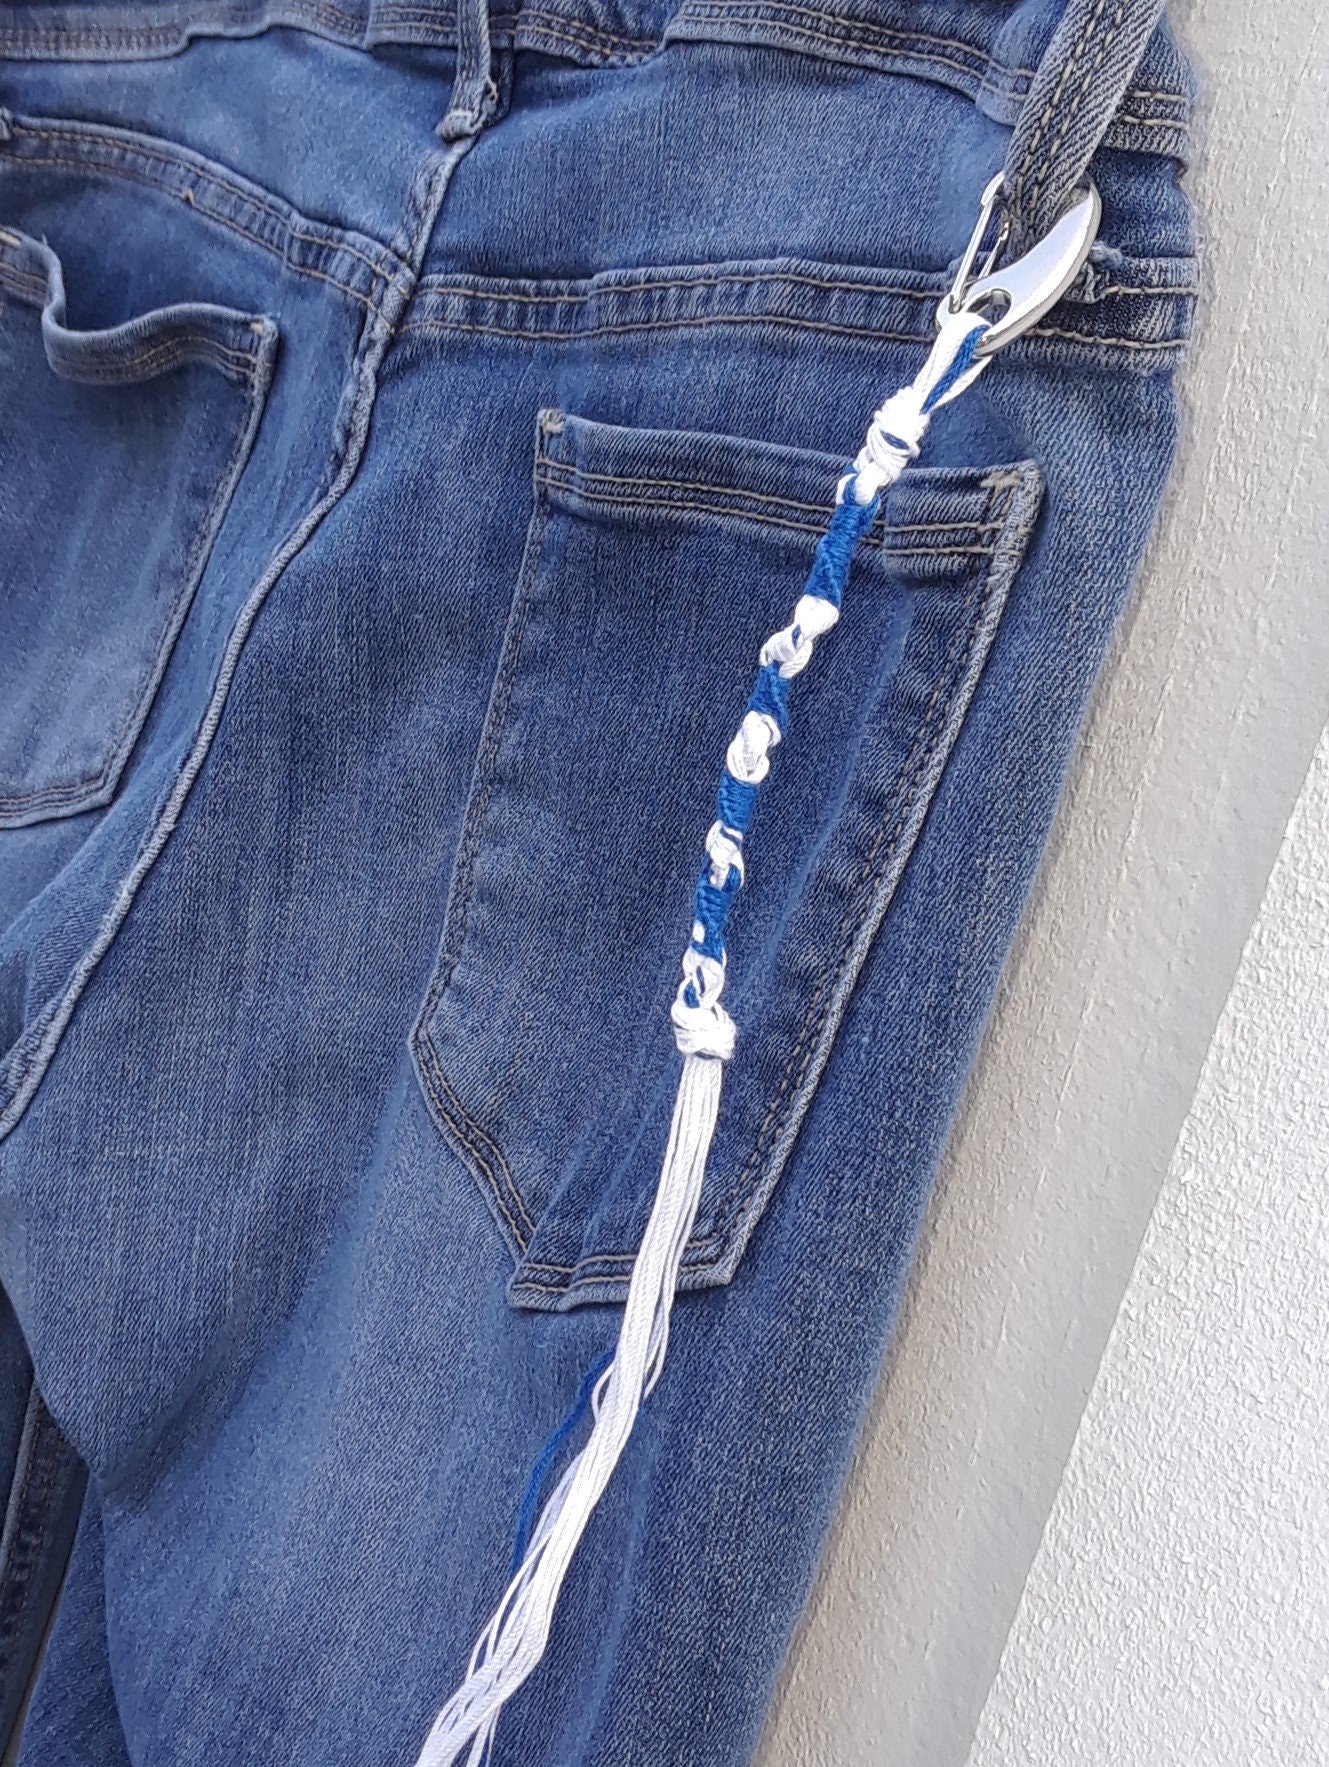 TZITZIT w/ SILVER CLIPS in Traditional Blue White Knotted With Yah's Name (10-5-6-5)